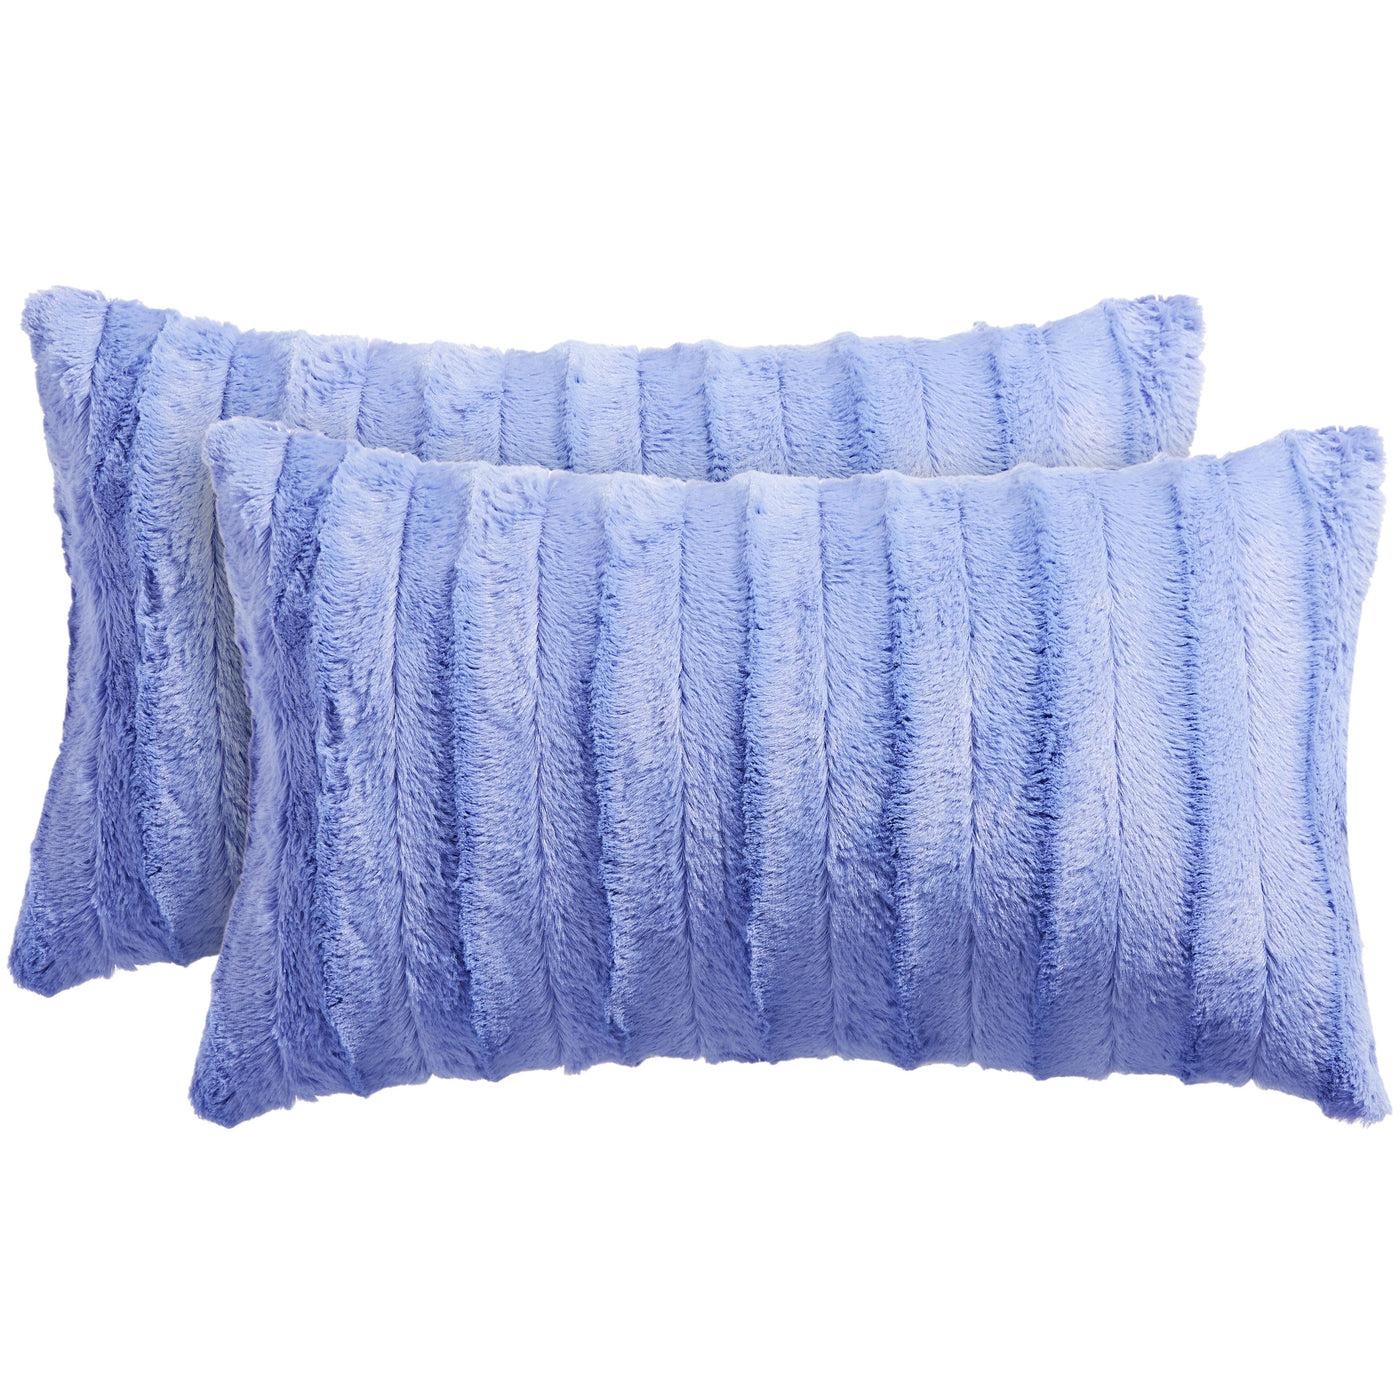 https://www.cheercollection.com/cdn/shop/products/cheer-collection-set-of-2-decorative-throw-pillows-reversible-faux-fur-to-microplush-accent-pillows-by-12x-20-516765_1400x.jpg?v=1671778469